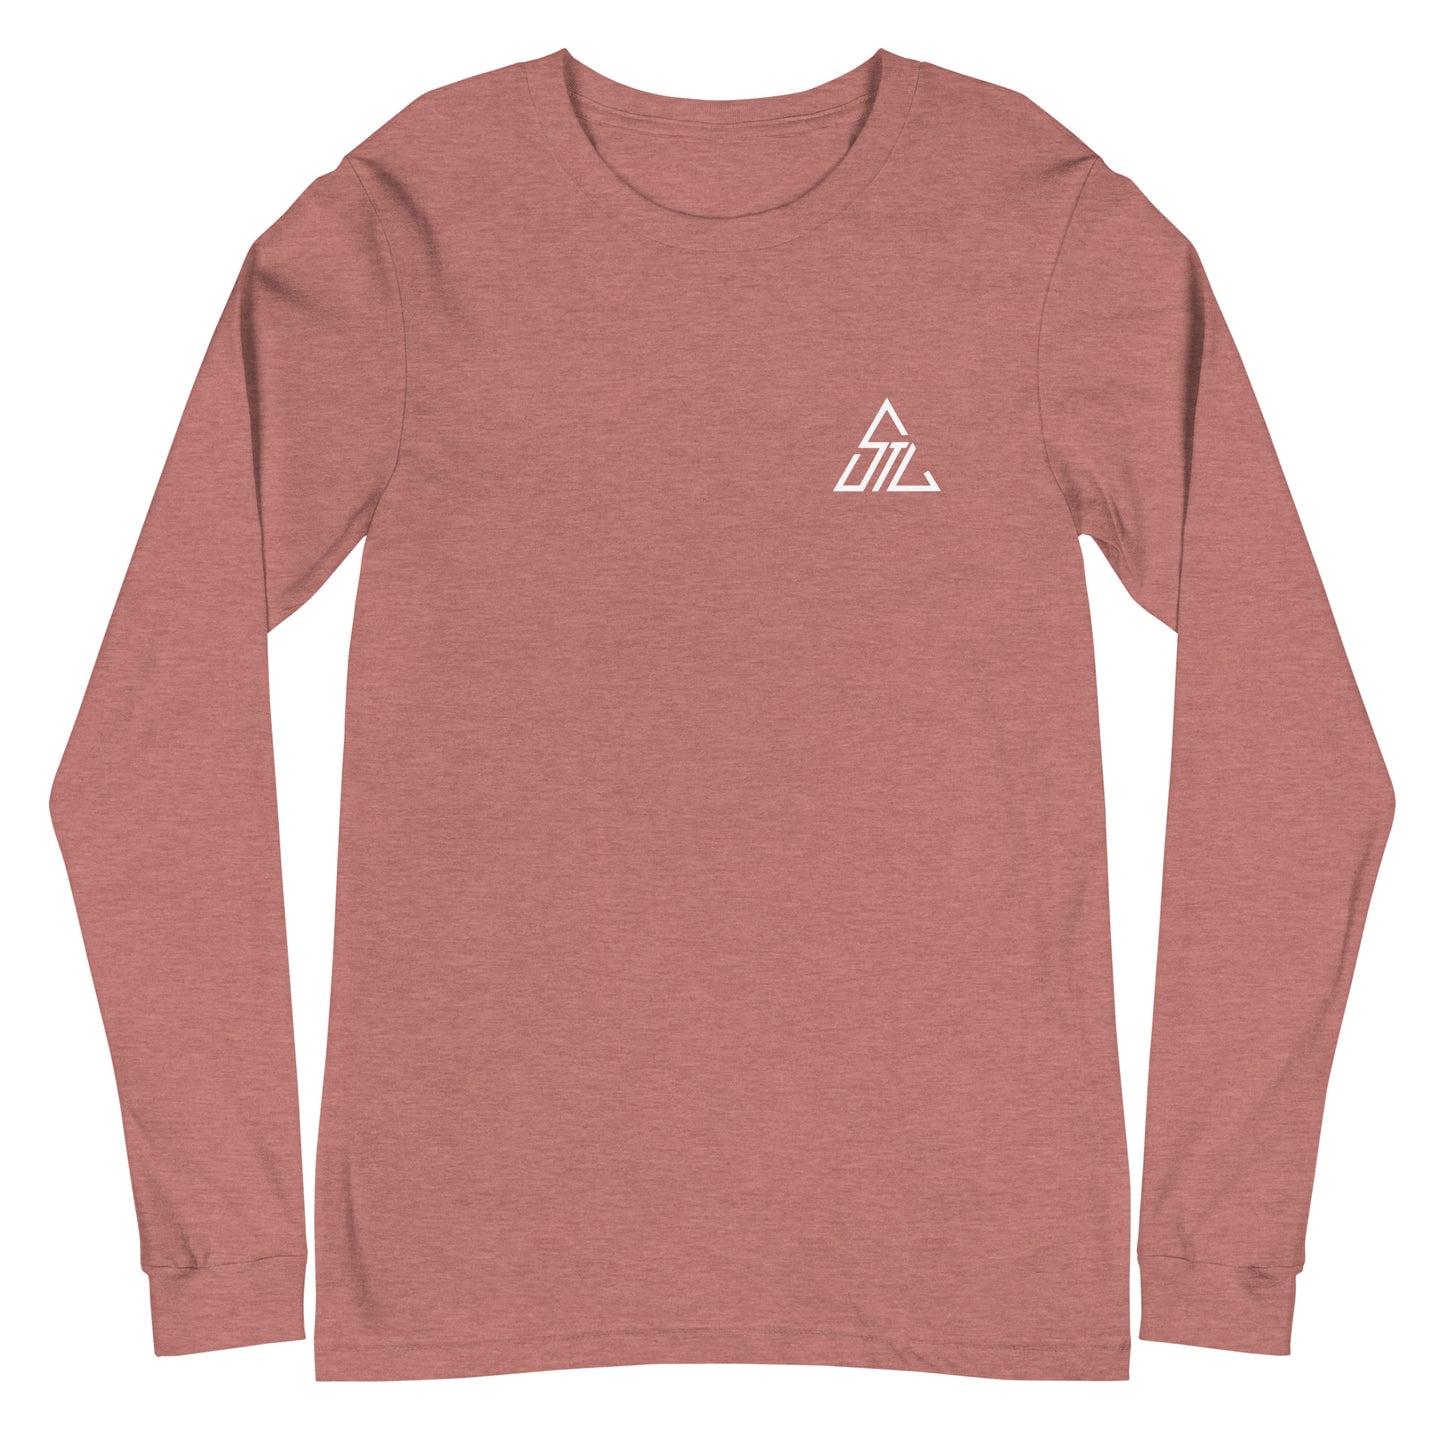 Two More Skip The Last "Bluebird" heather mauve unisex Long sleeve t-shirt. Front view